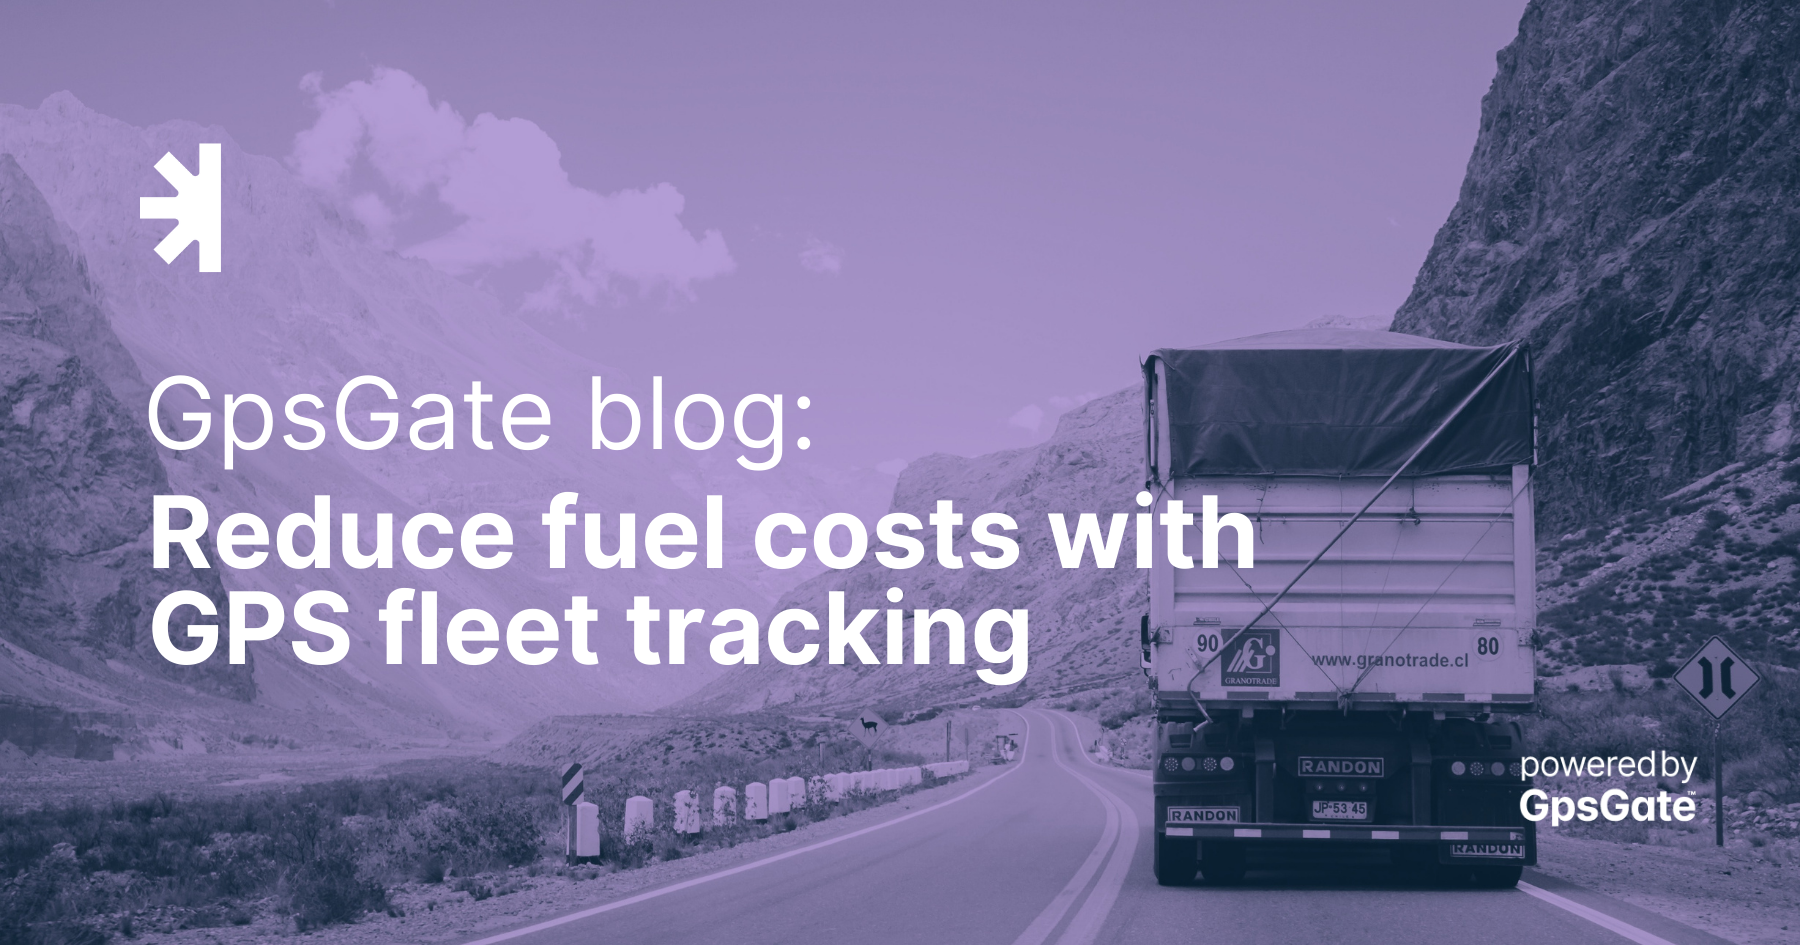 Fleet management to reduce fuel use with GpsGate